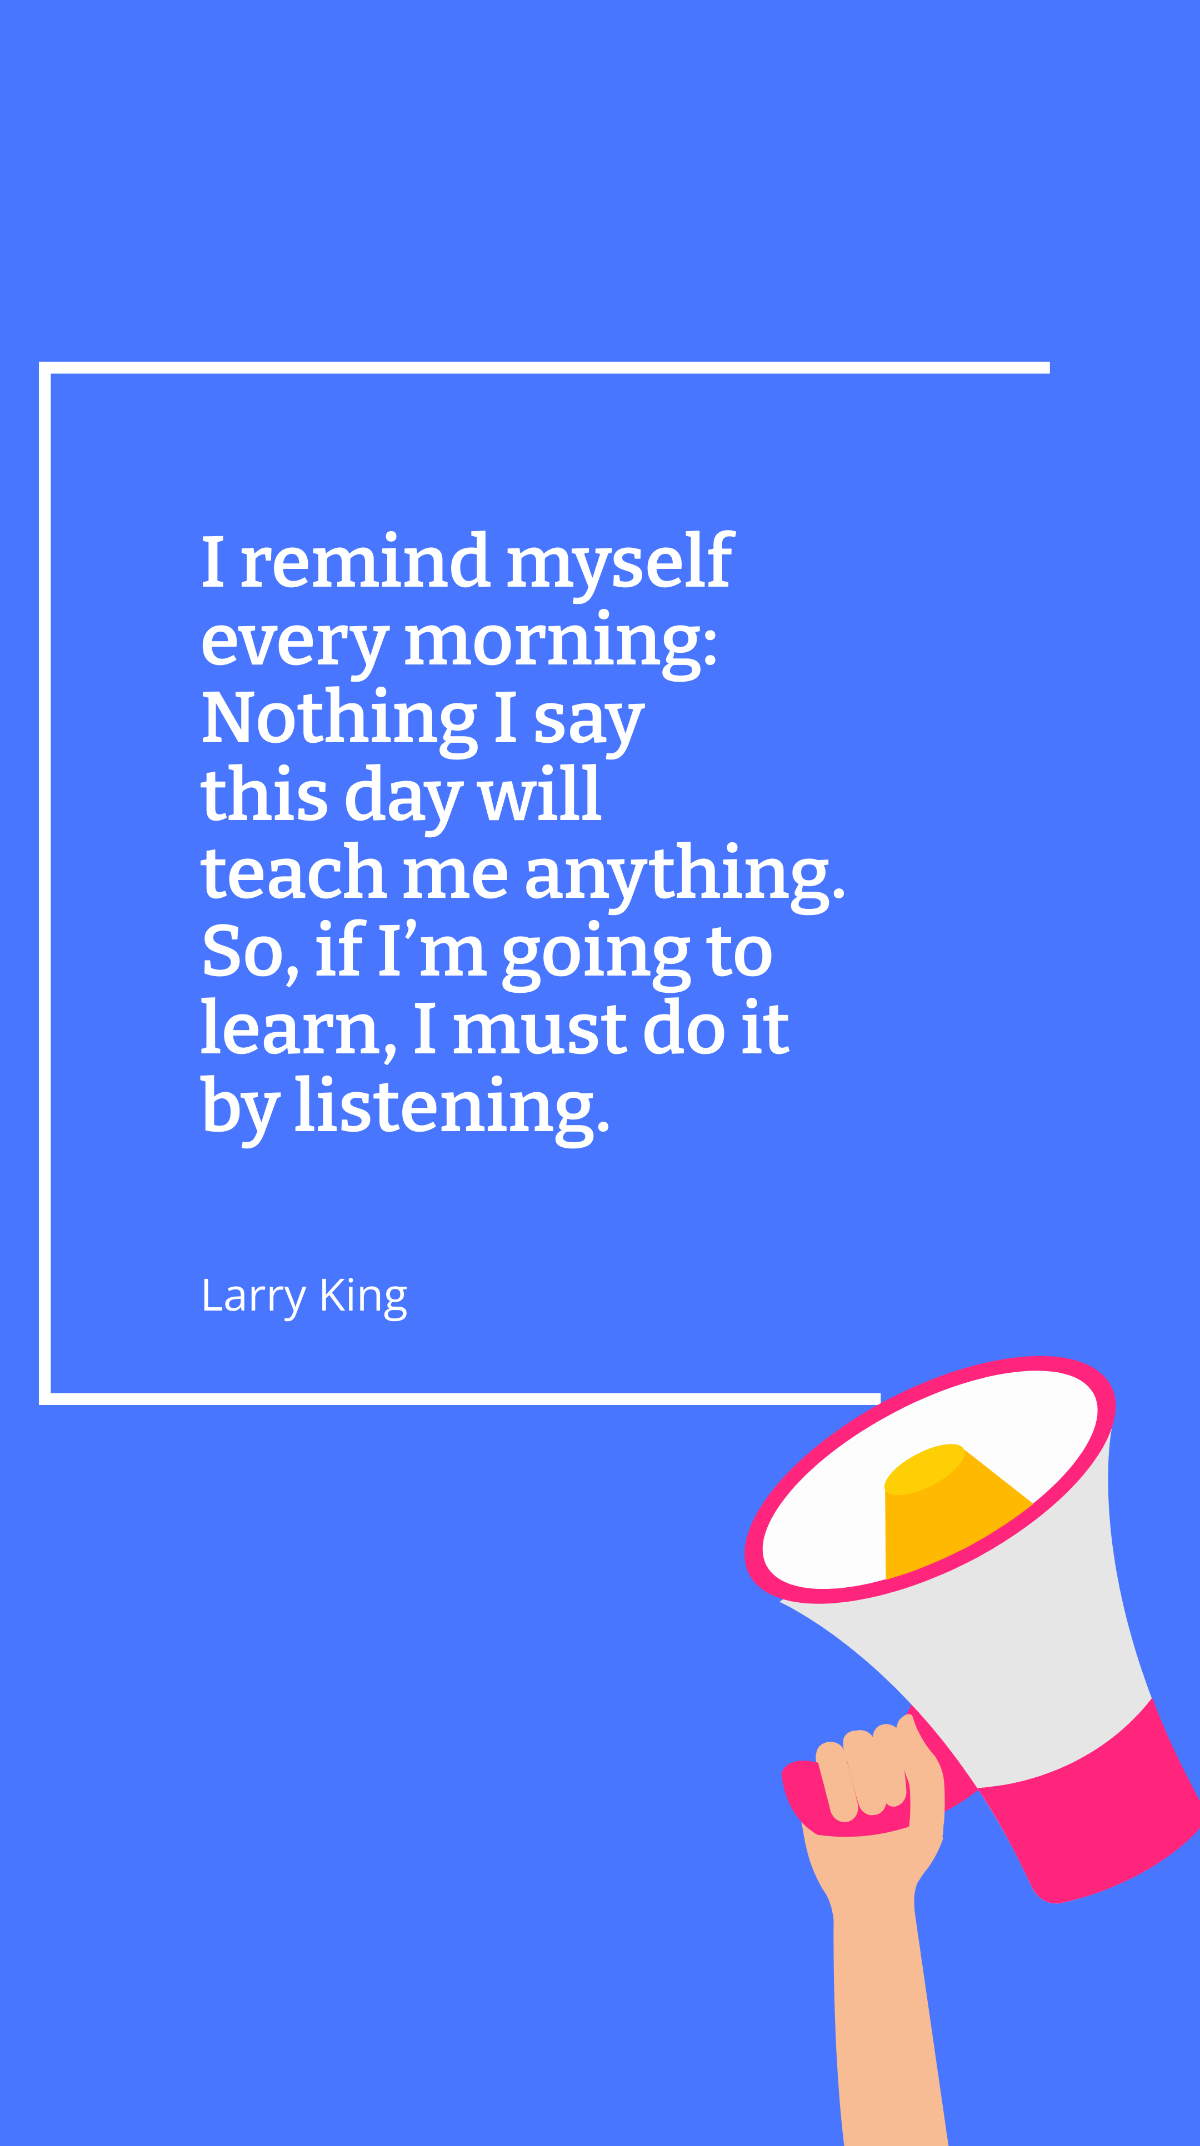 Larry King - I remind myself every morning: Nothing I say this day will teach me anything. So, if I’m going to learn, I must do it by listening. Template